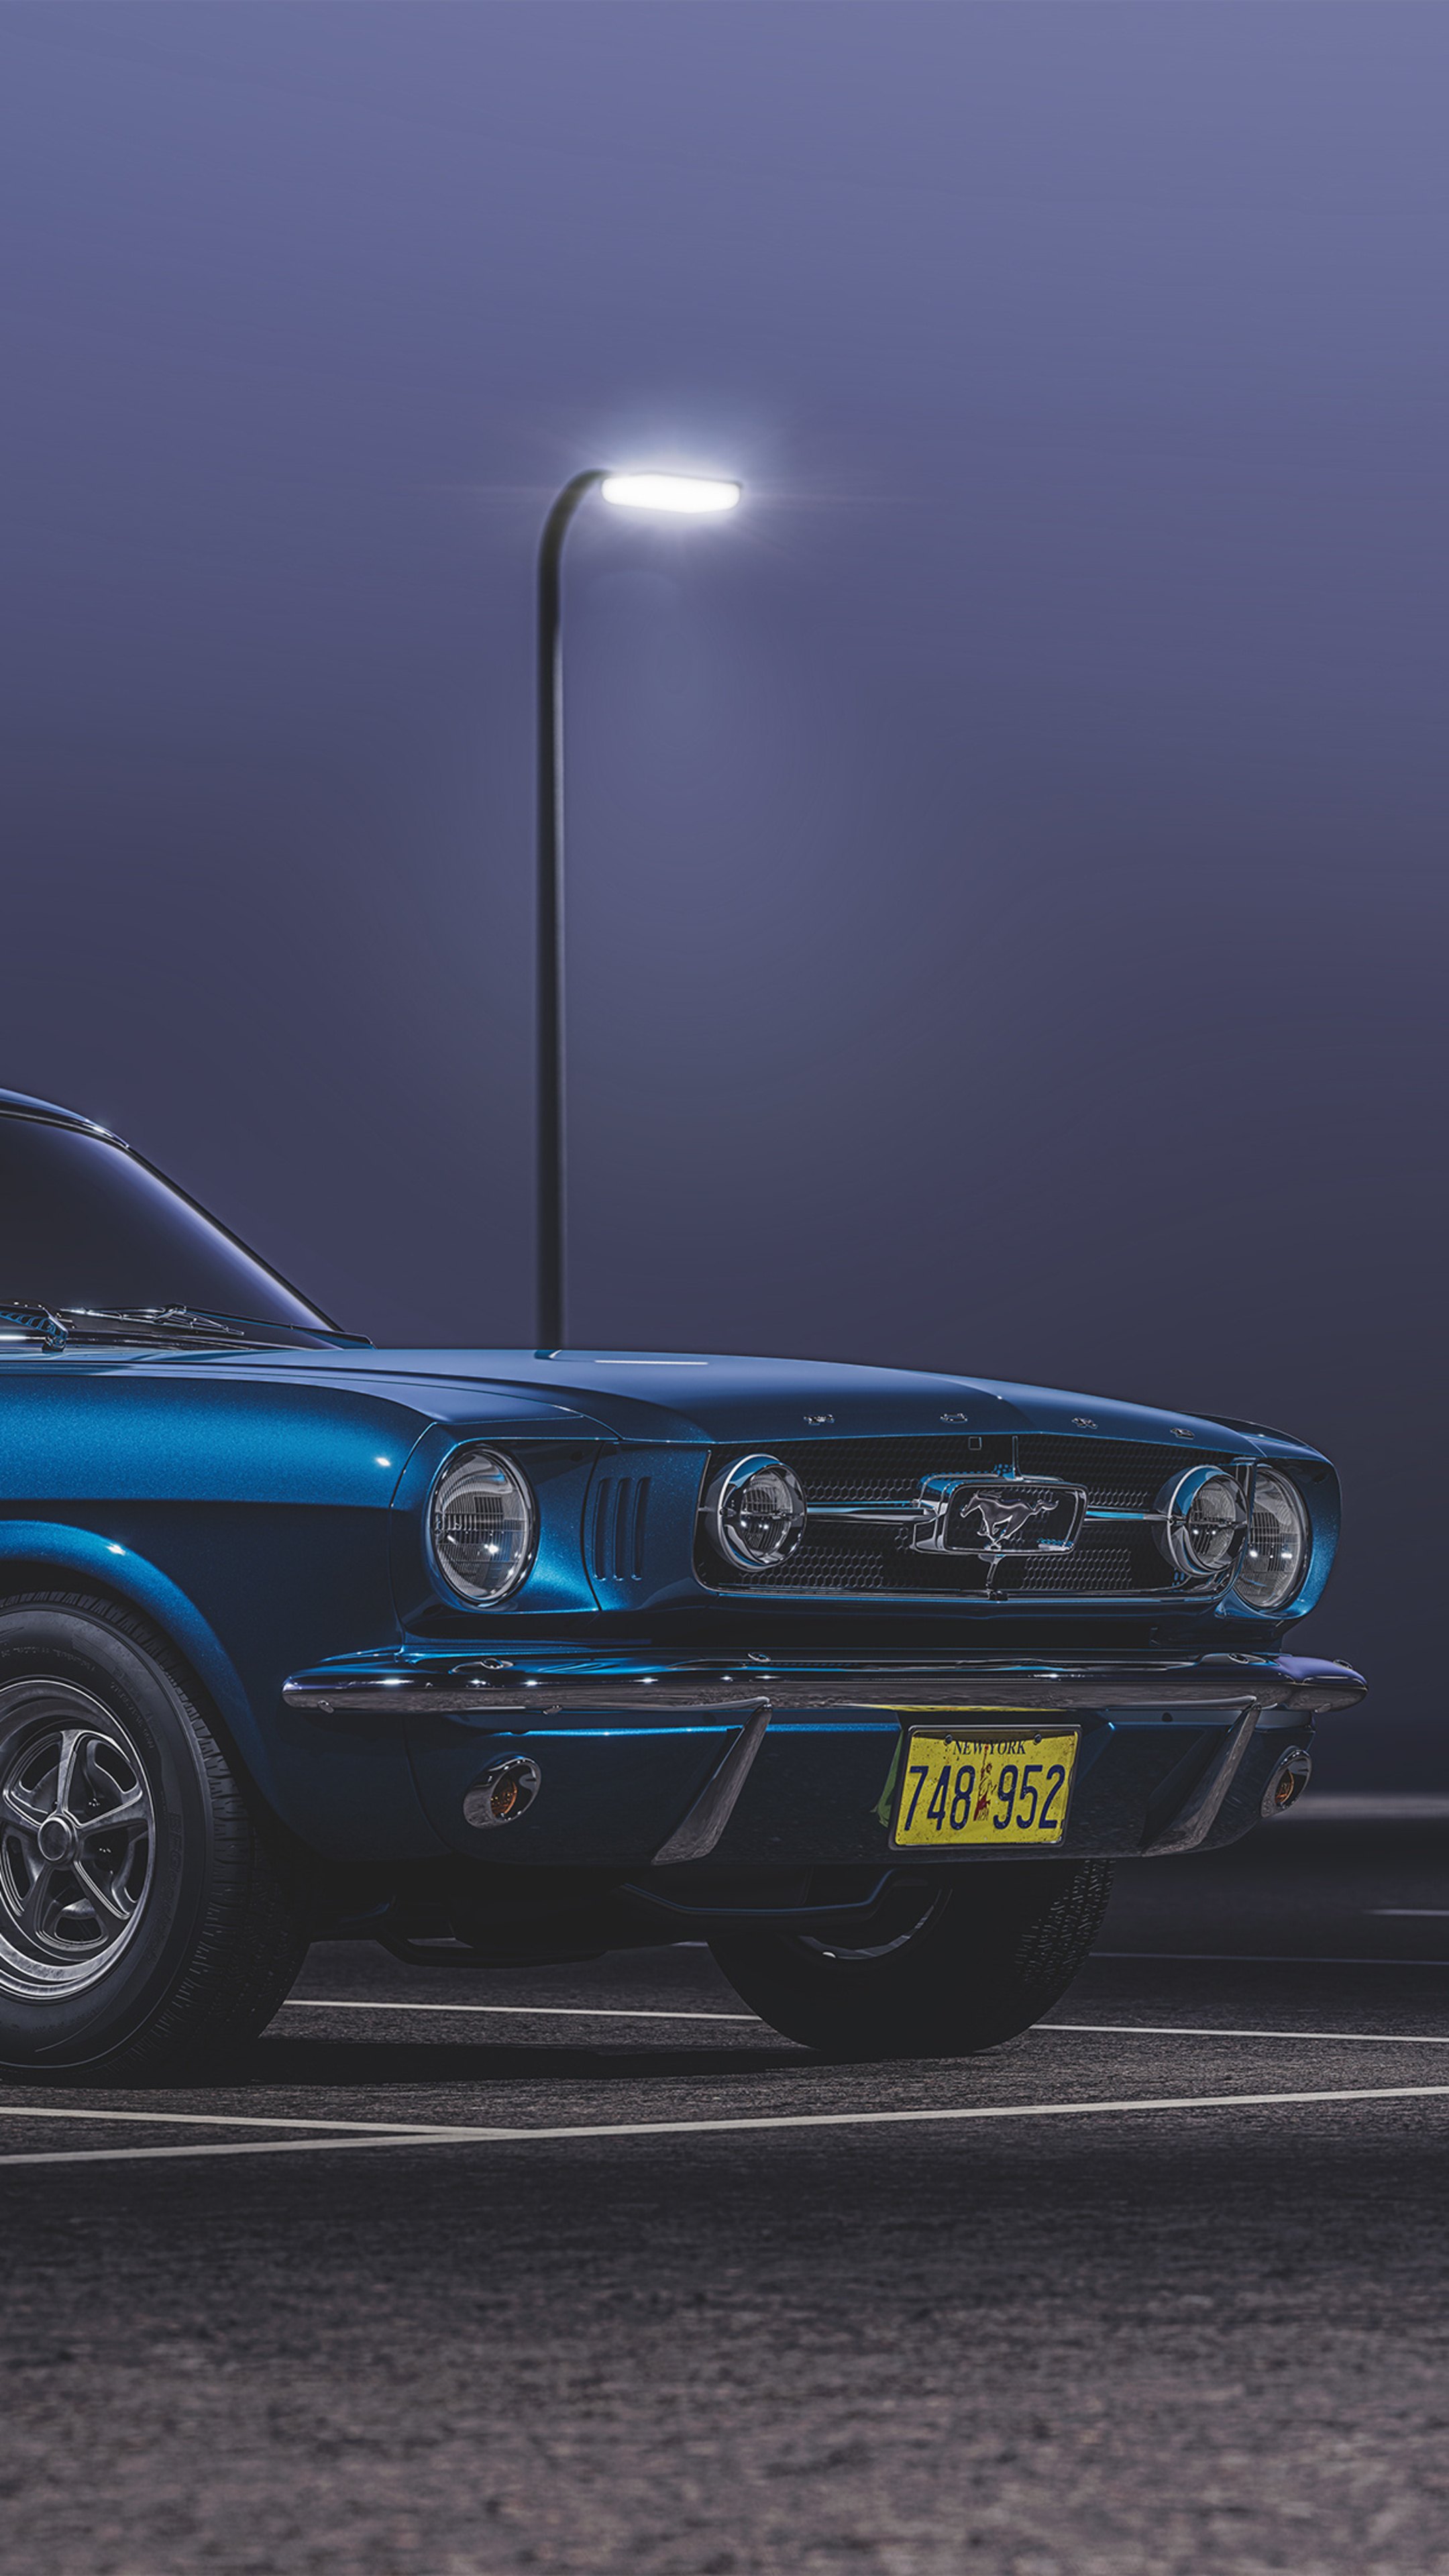 Ford Mustang, Ford Mustang 1965, Sony Xperia, 2160x3840 4K Phone